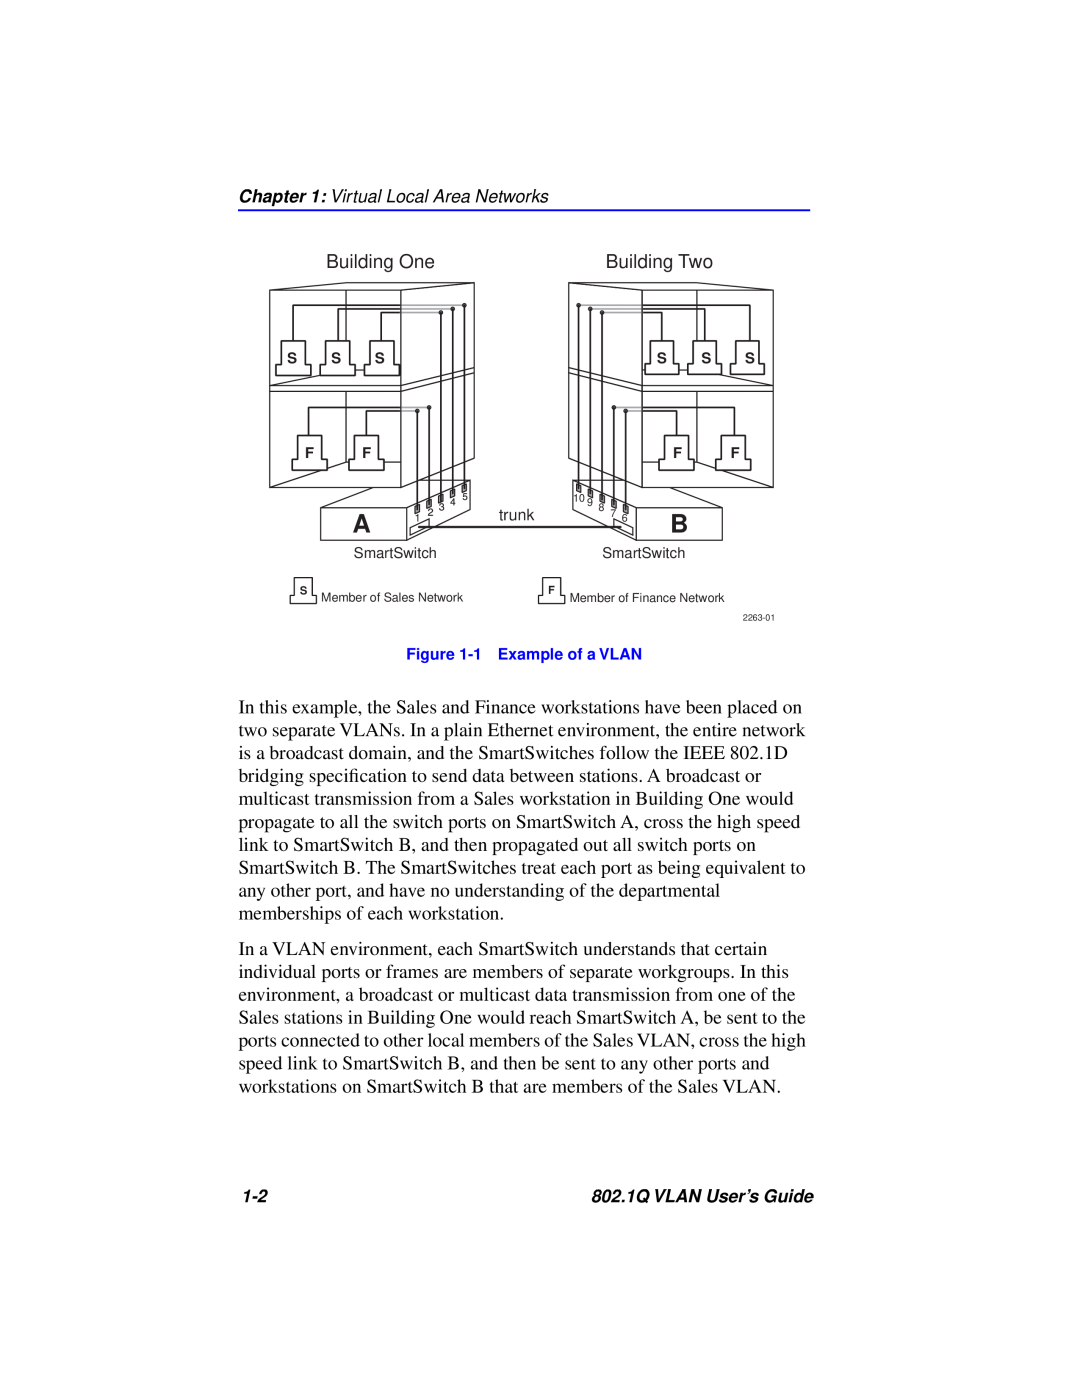 Cabletron Systems 802.1Q manual Building One, Building Two 